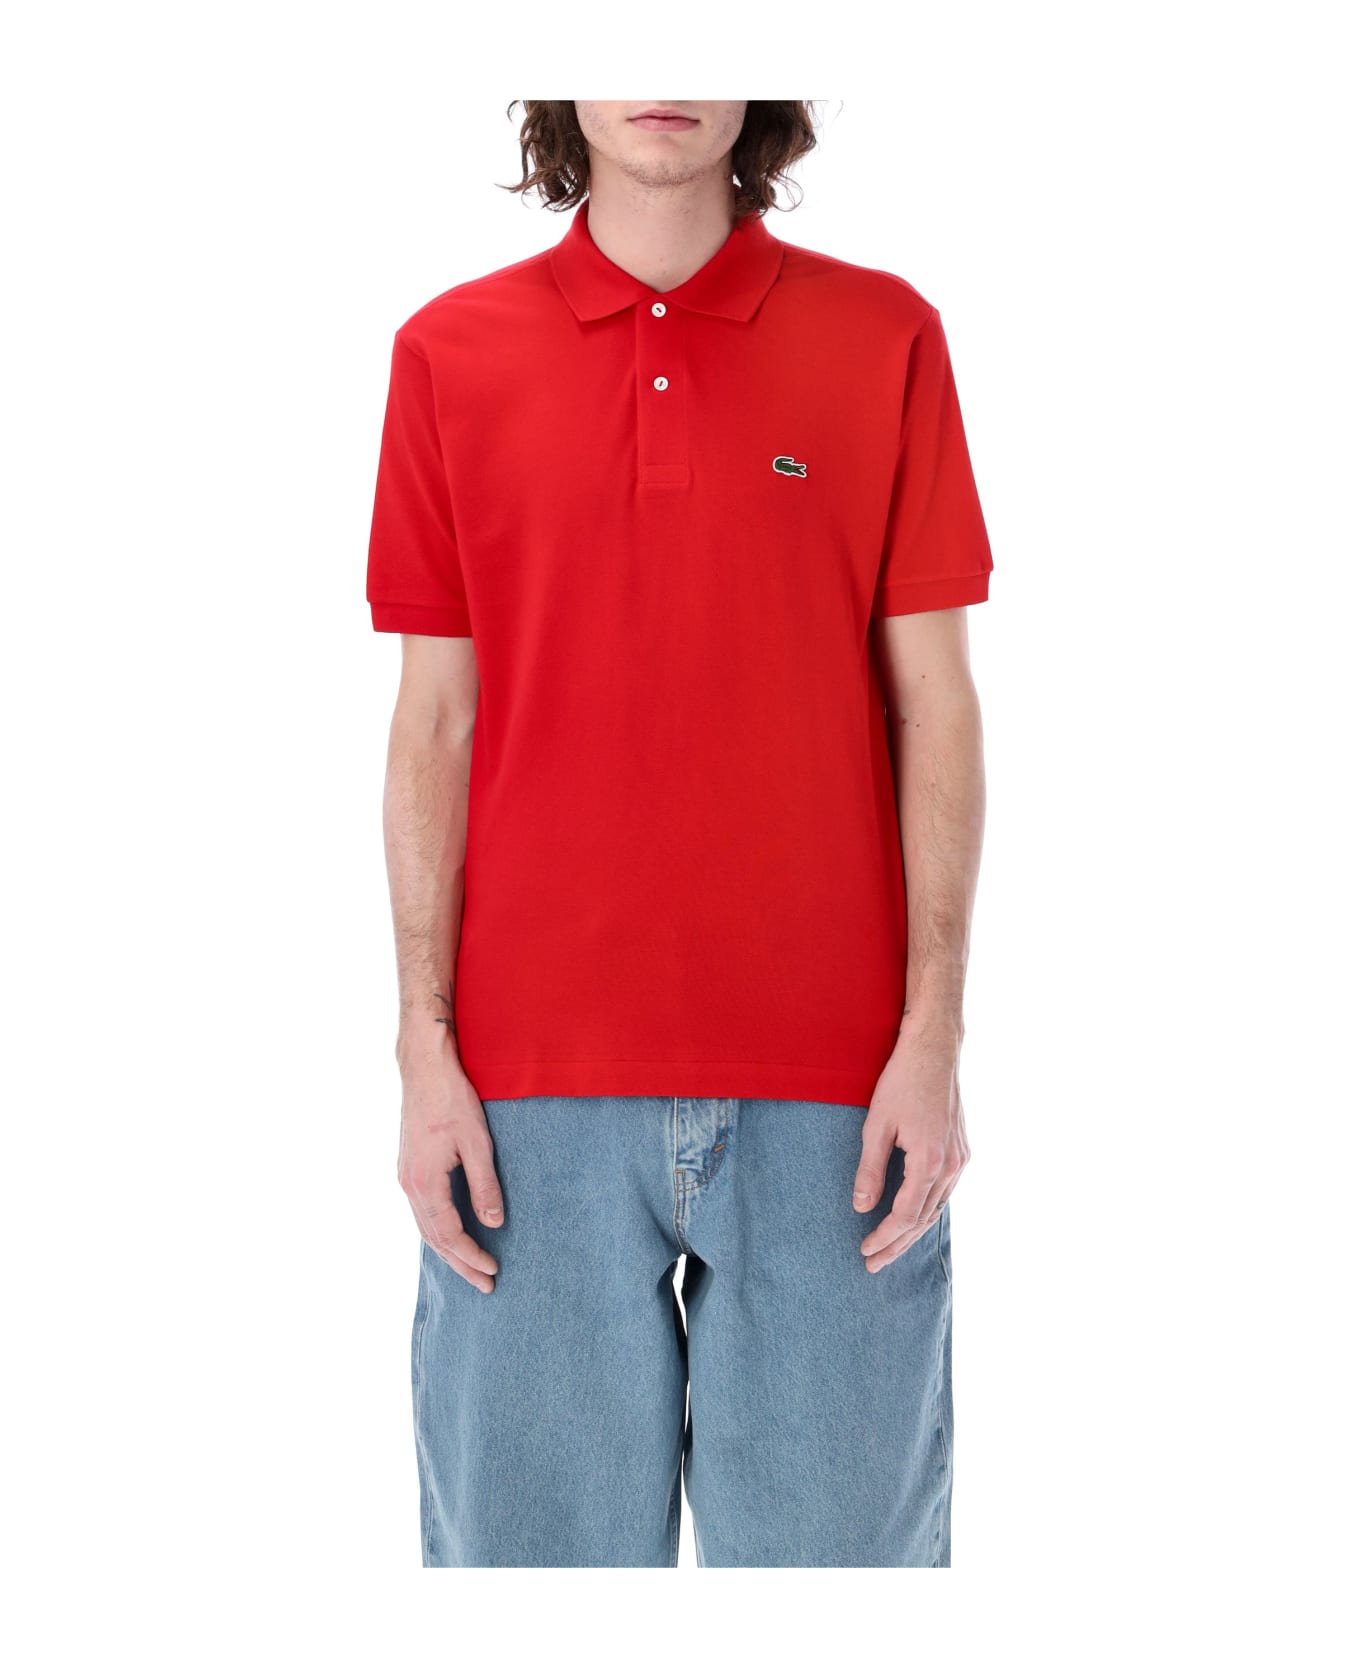 Lacoste Classic Fit Polo Shirt - RED ポロシャツ